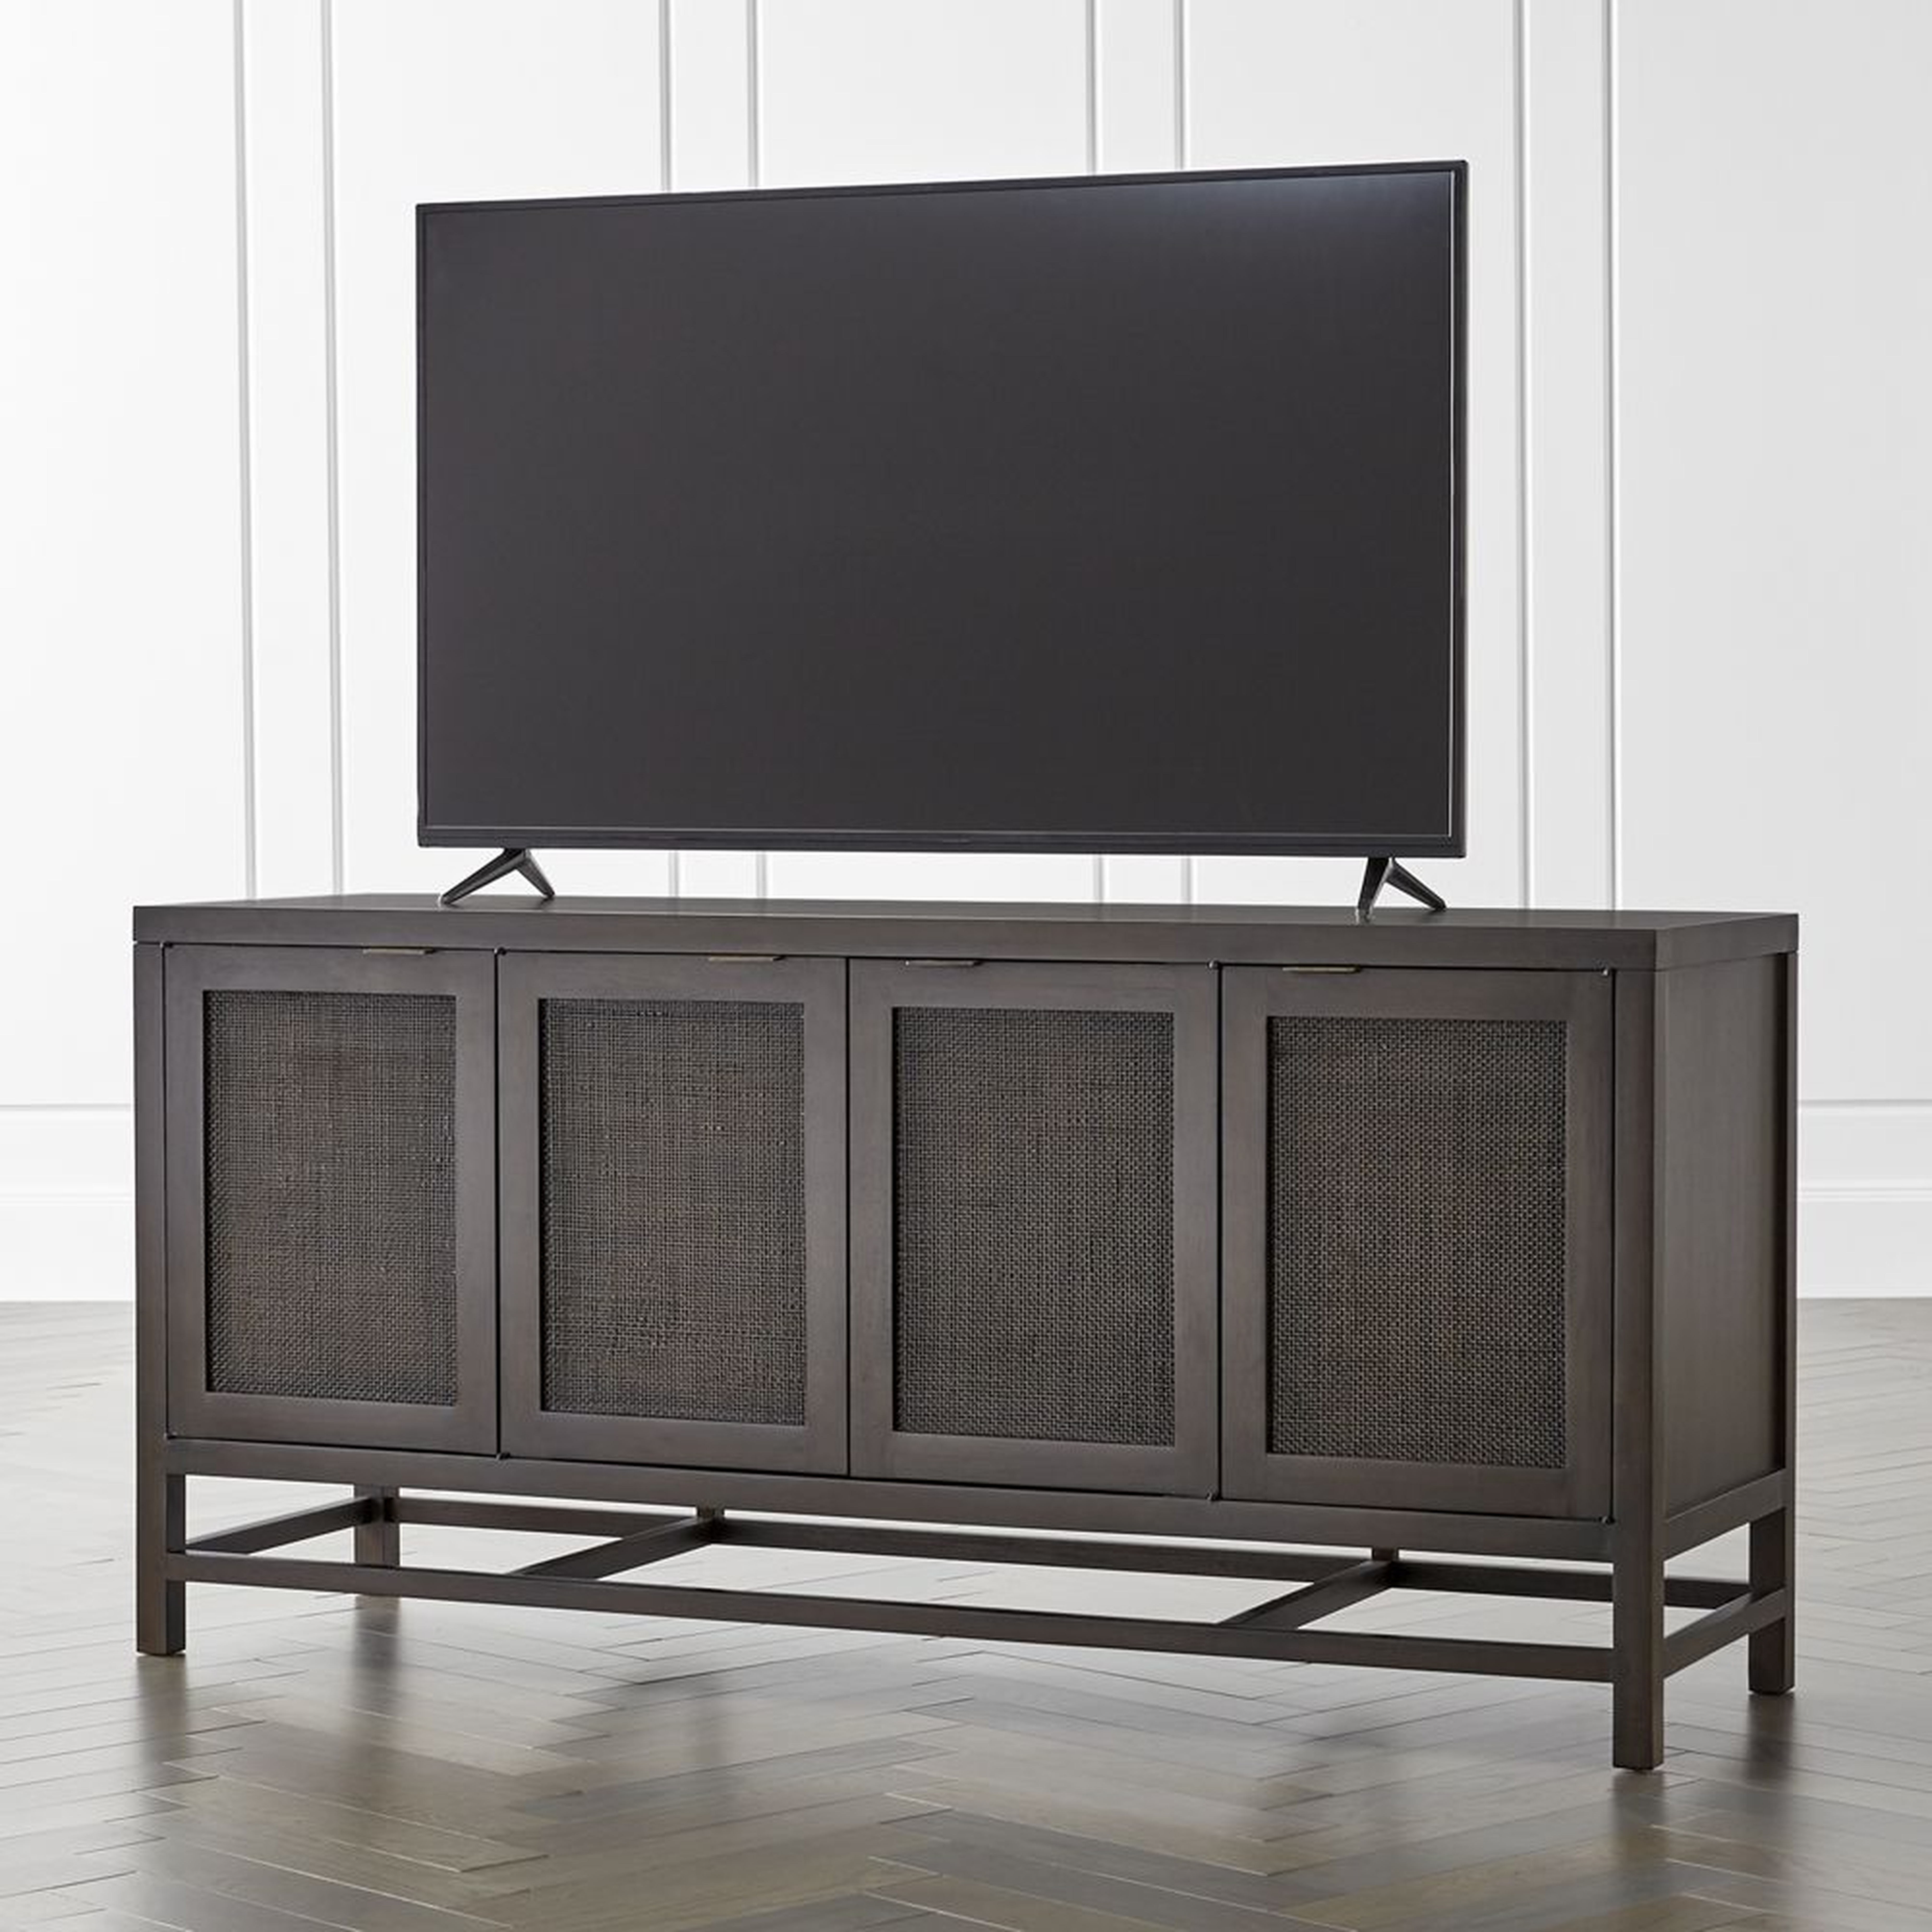 Blake Carbon 68" Media Console - Crate and Barrel